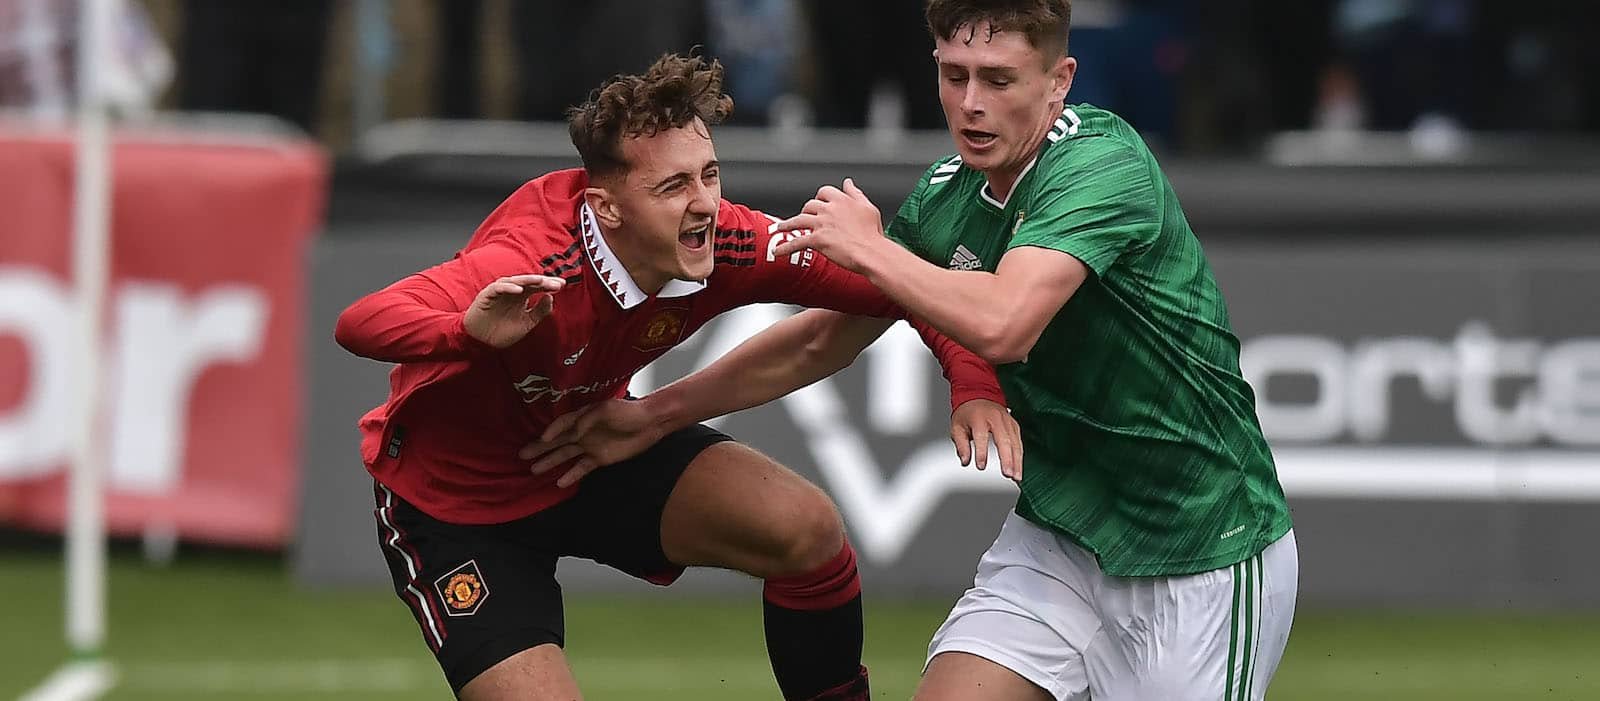 Manchester United u19s finish in 5th place at Mercedes-Benz Junior Cup – Man United News And Transfer News